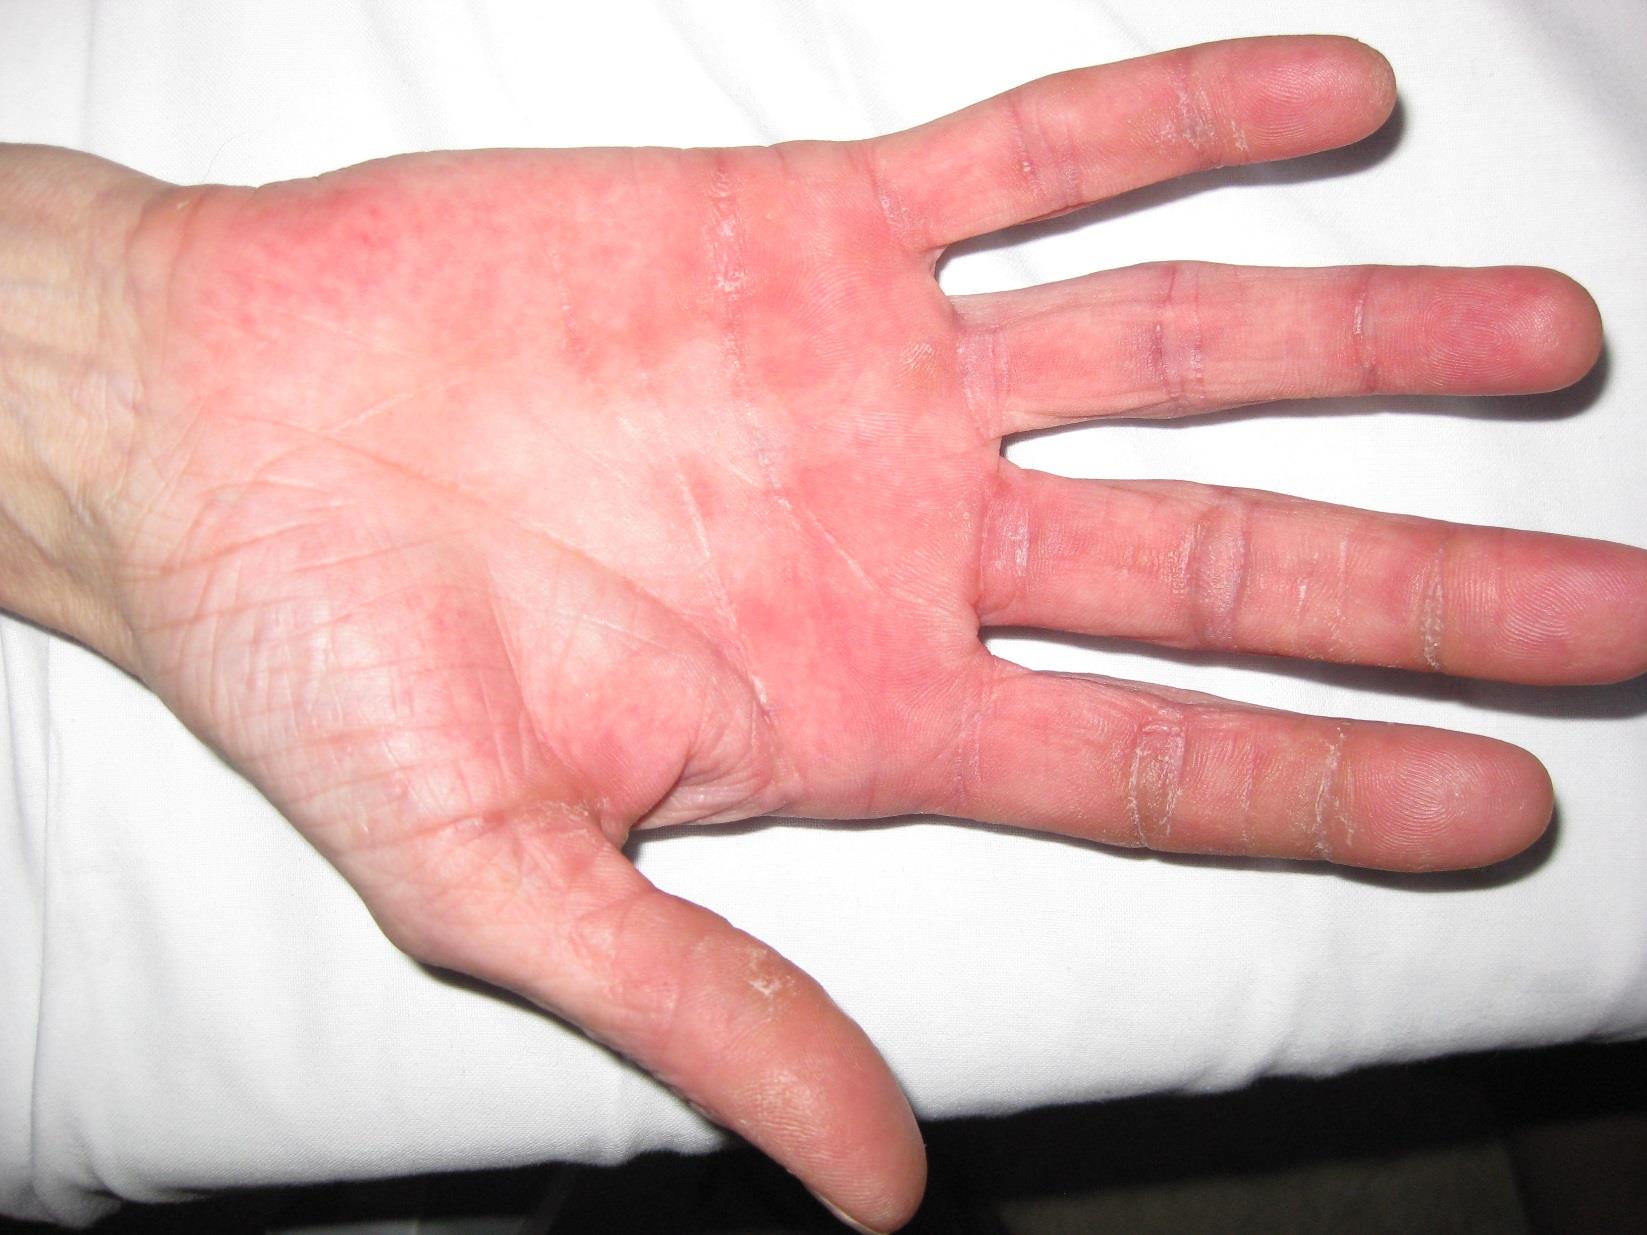 DermNet Case: Widespread Itchy Rash In Patient With Trisomy 21